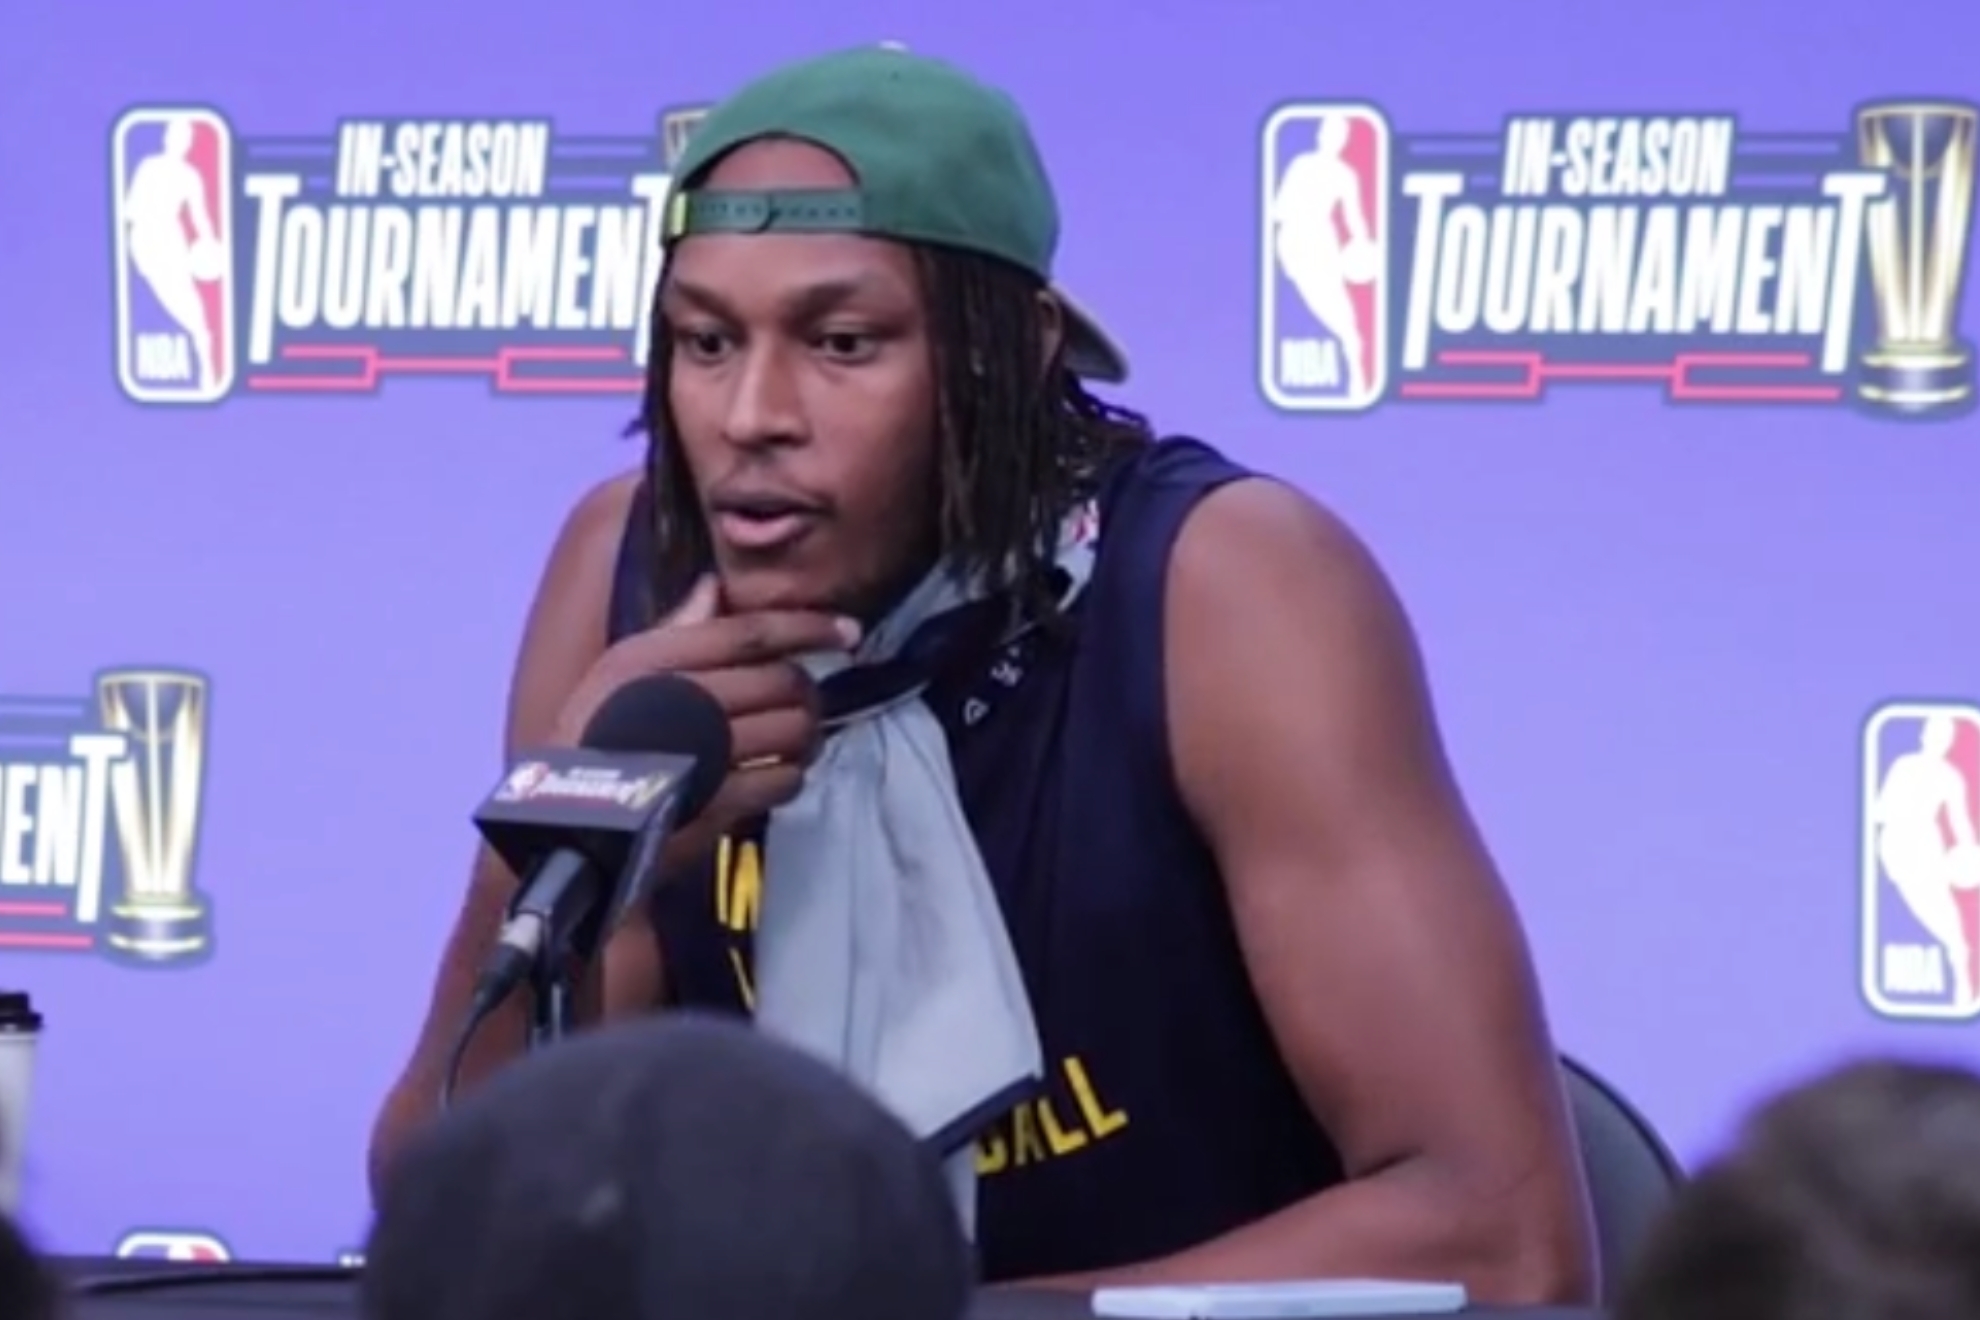 Myles Turner spoke to the media in Las Vegas about the In-Season tournament